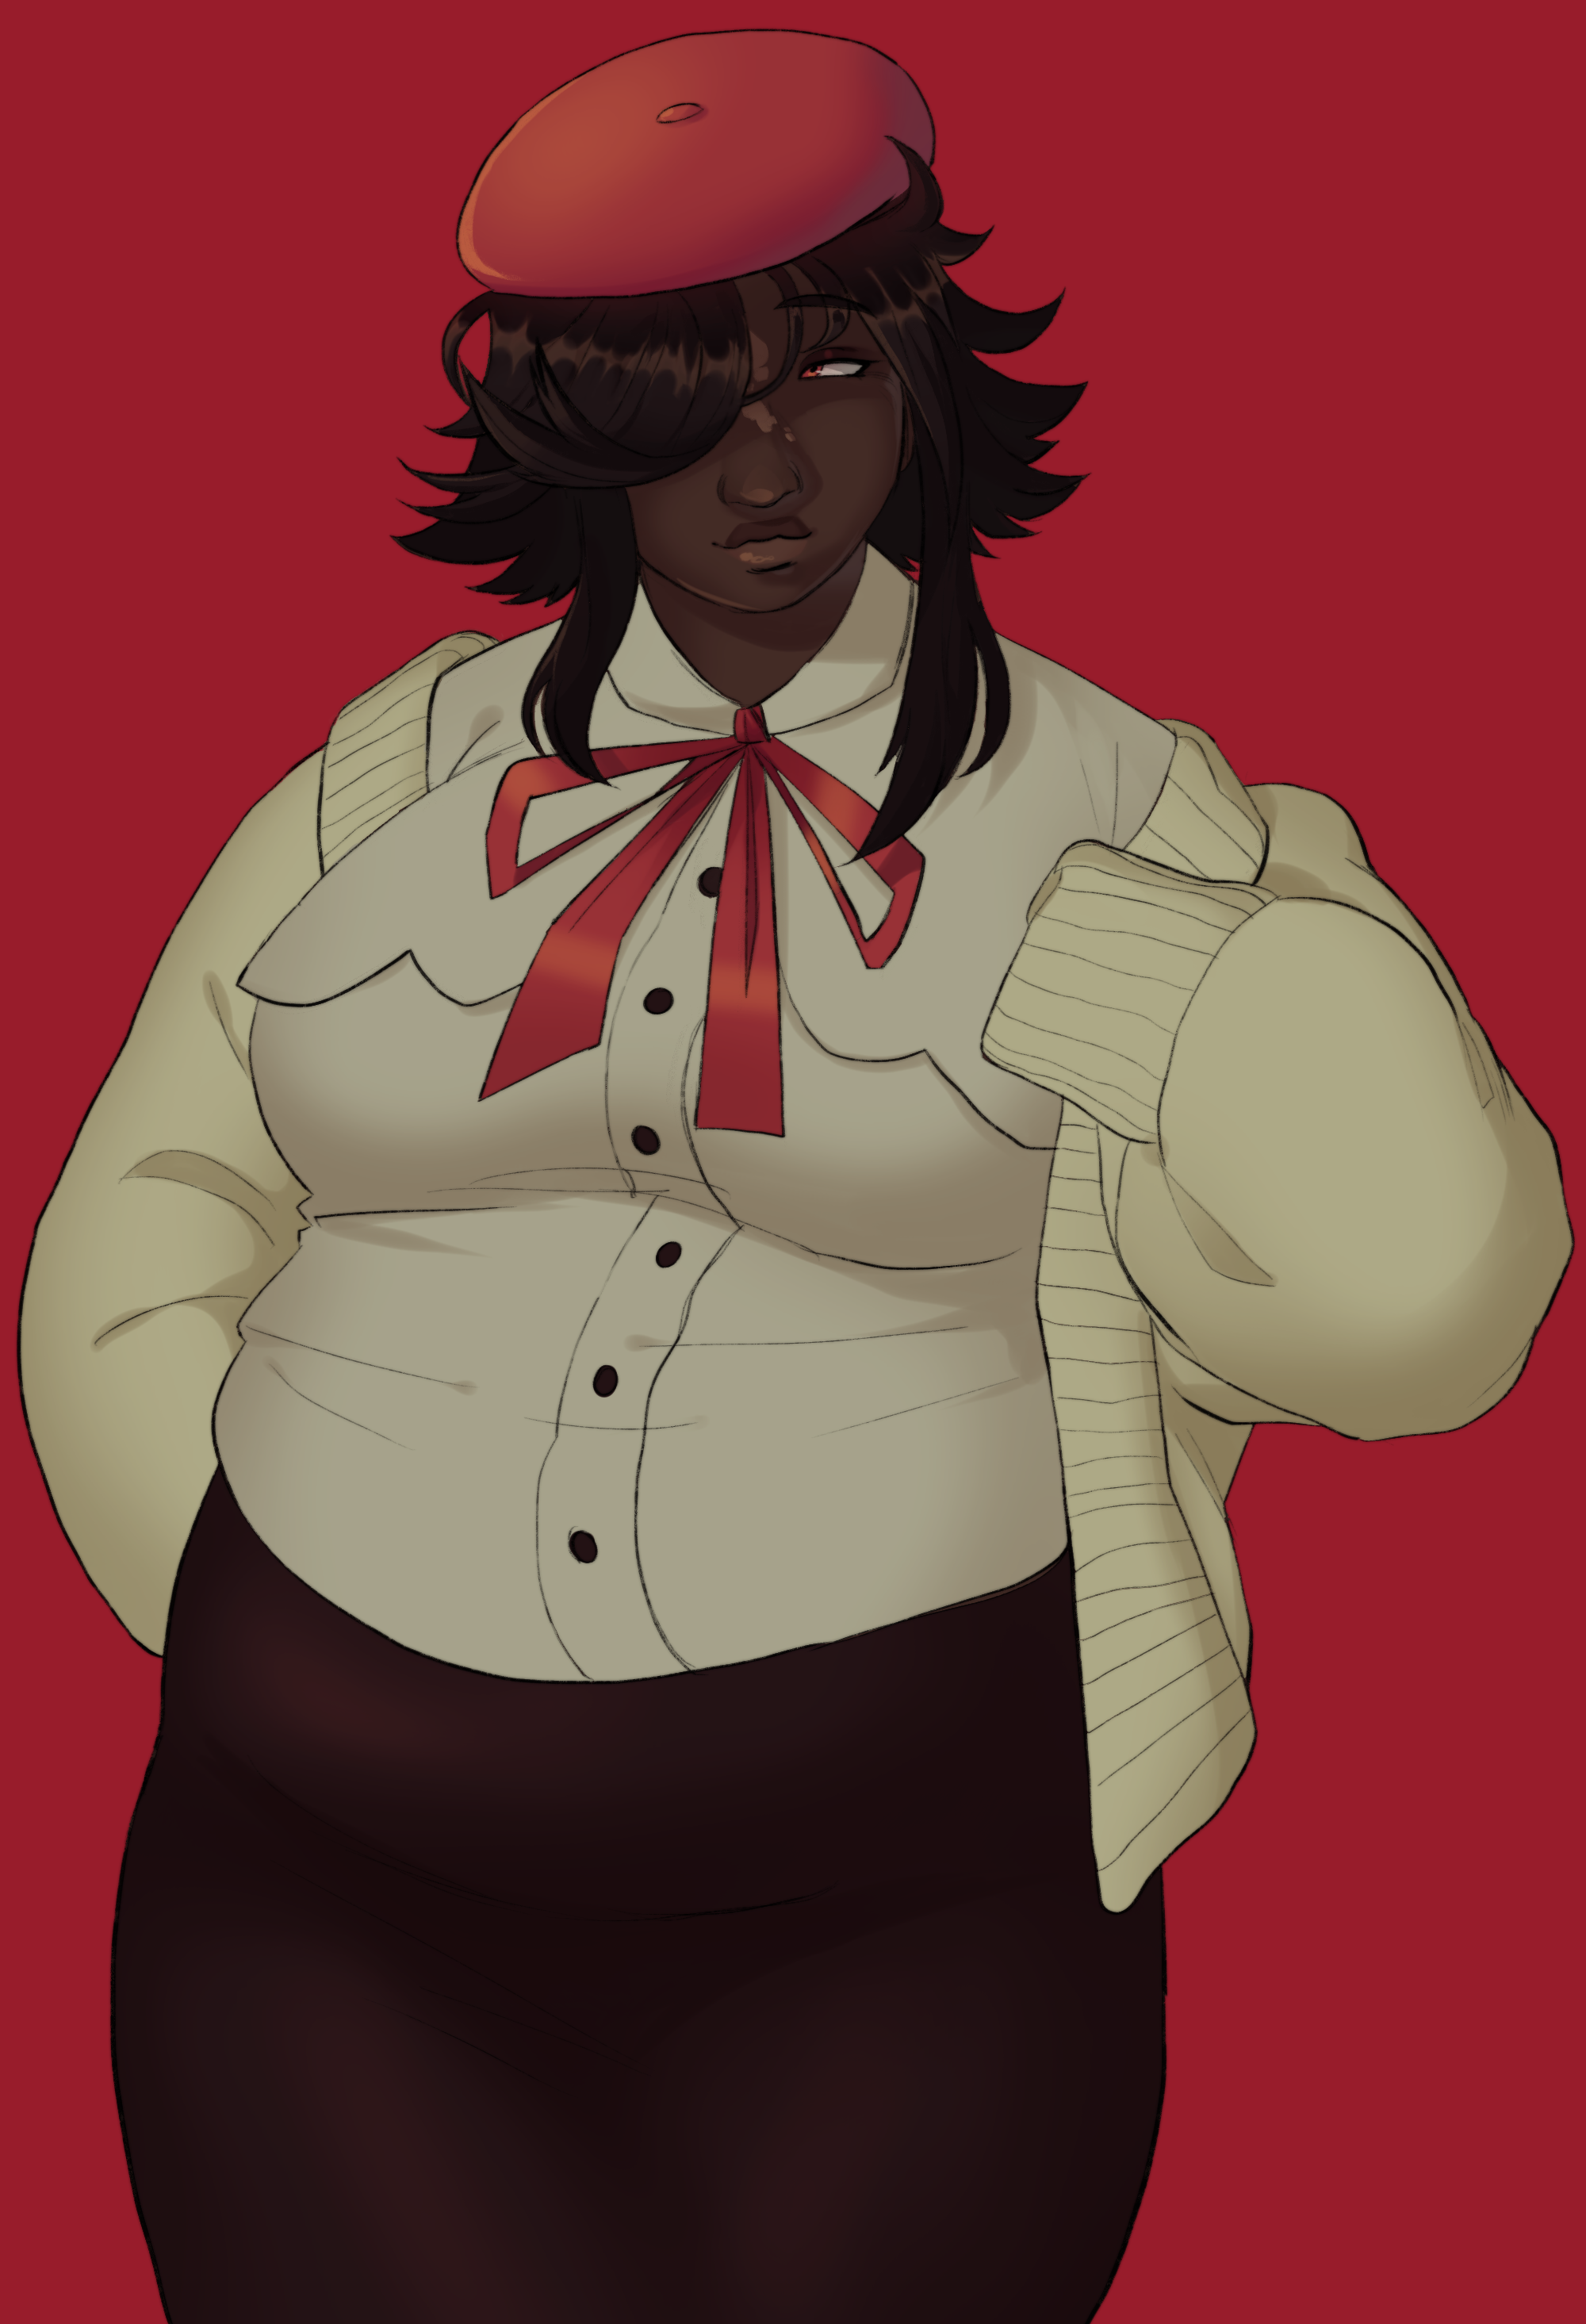 An illustration of a femme presenting plus size character with dark skin, very dark brown hair that covers the left side of her face, and red eyes. She is peeking out from underneath her bangs and smiling elegantly. She is wearing a white button down shirt with an off white sweater over it. She has a loose, red bow tied around her collar and a fitting, burgundy skirt. Her hair is styled to be shoulder length in the back with two longer parted sections hanging down her shoulders. She has her hands tucked into her sleeves with one hand brought up to her shoulder and the other placed on her hip.